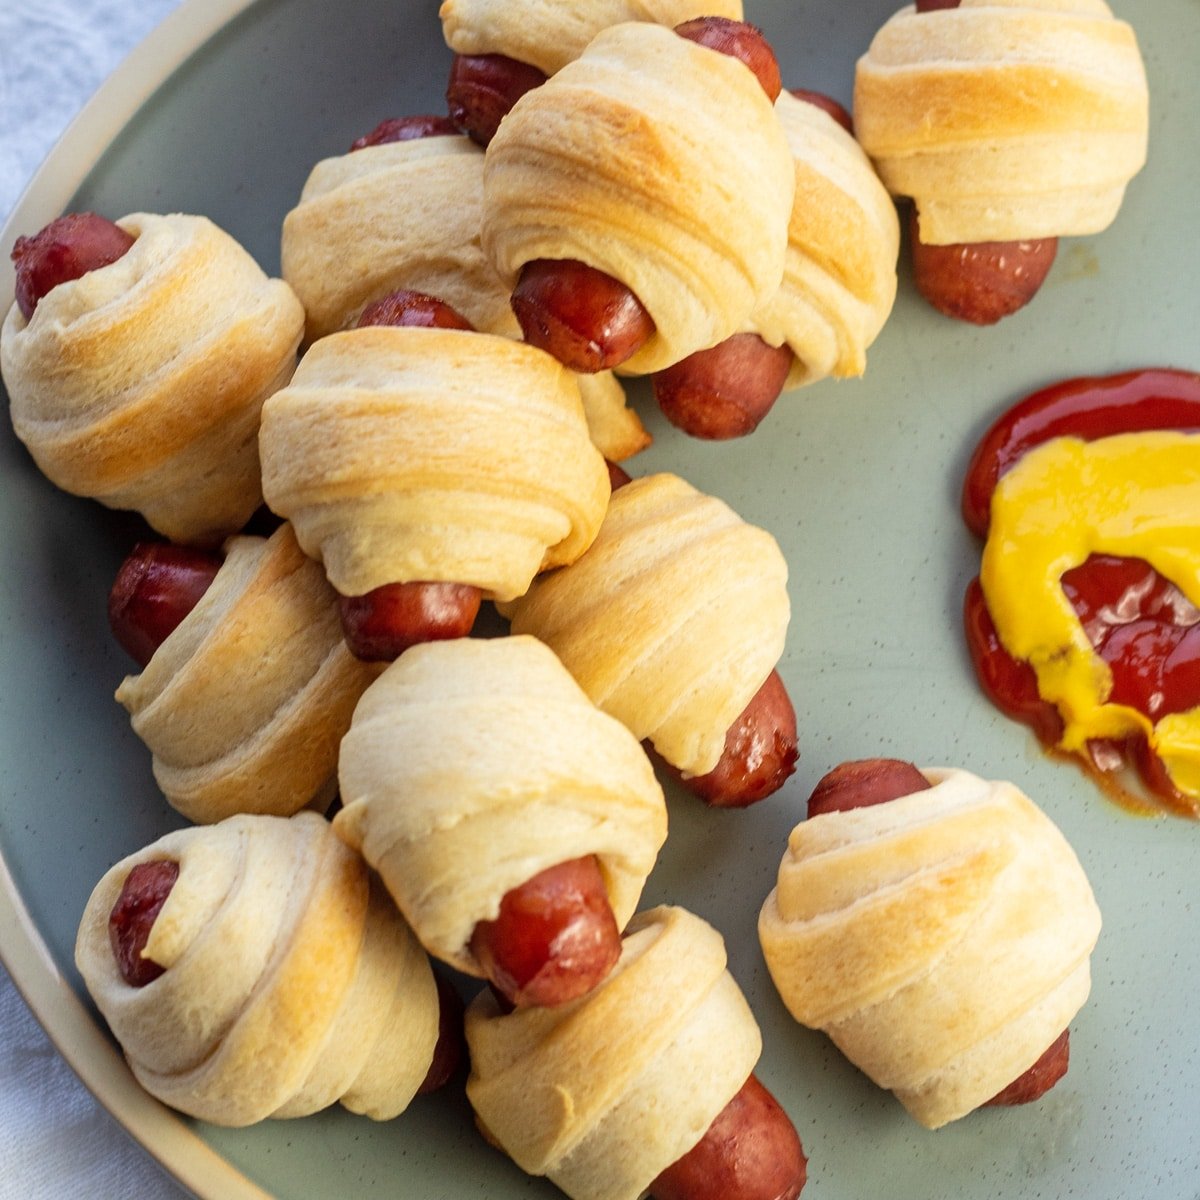 Lil smokies pigs in a blanket served with ketchup and yellow mustard.